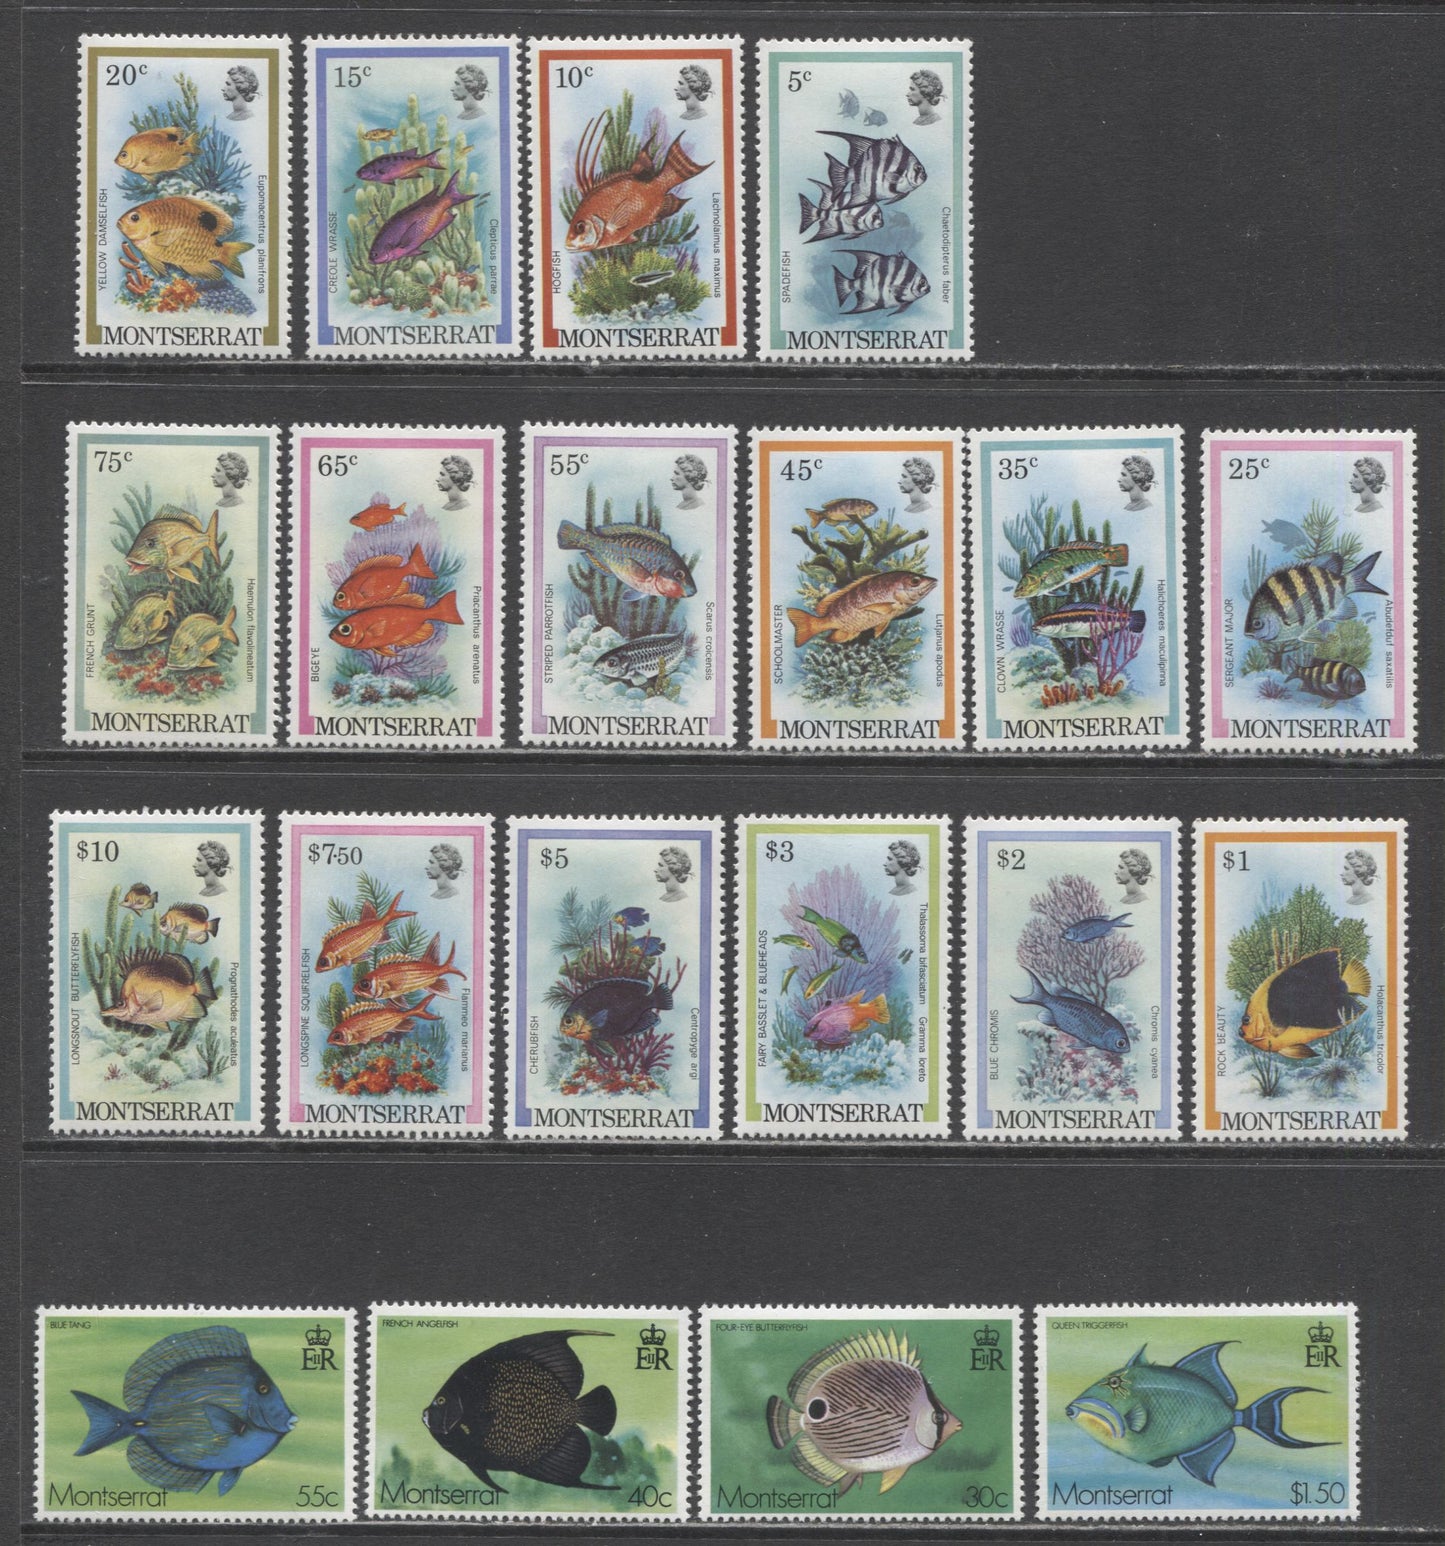 Lot 85 Montserrat SC#381/460 1979-1981 Fish Issues, 20 VFOG Singles, Click on Listing to See ALL Pictures, 2017 Scott Cat. $29.5